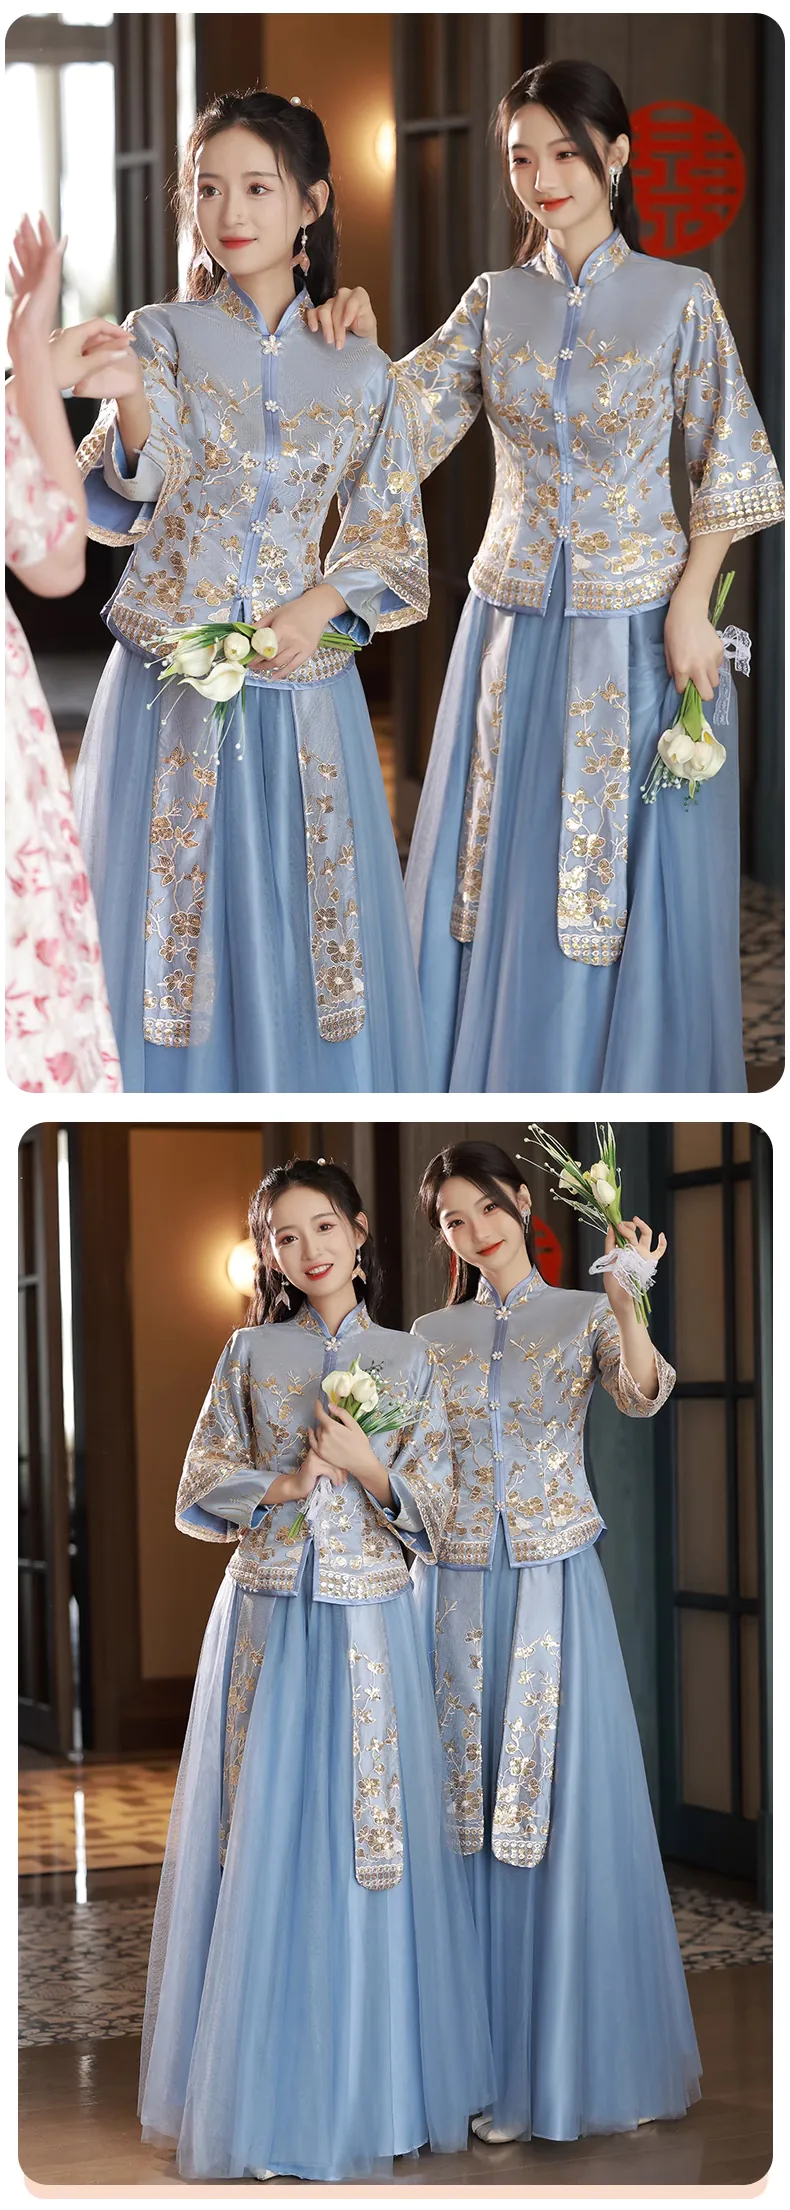 Chinese-Traditional-Style-Blue-Bridal-Wedding-Party-Bridesmaid-Dress15